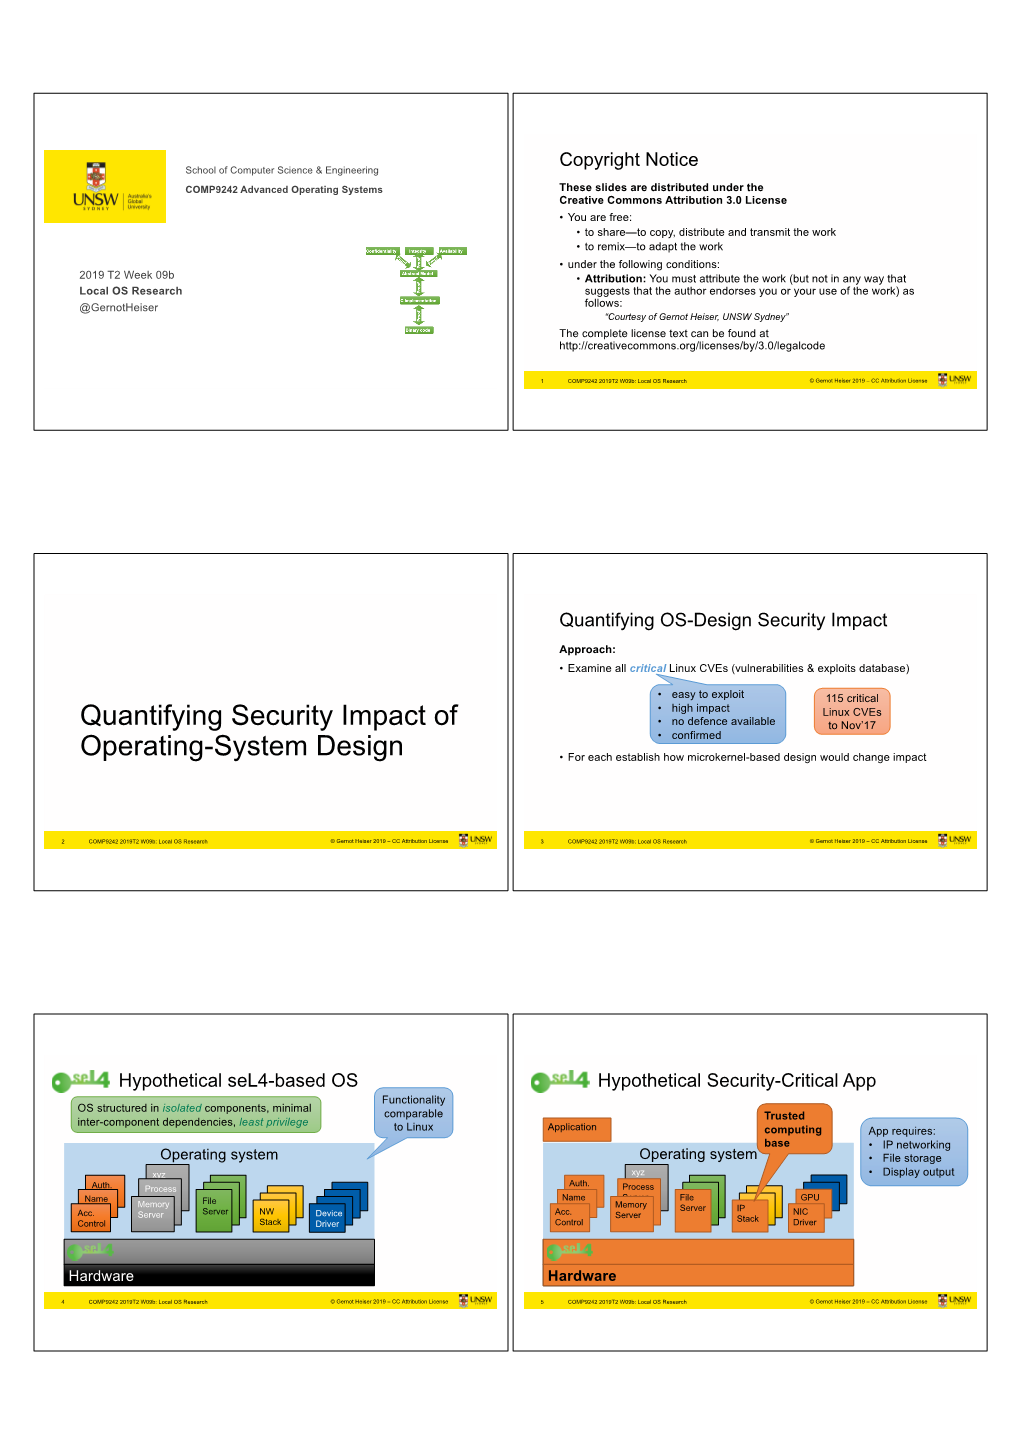 Quantifying Security Impact of Operating-System Design